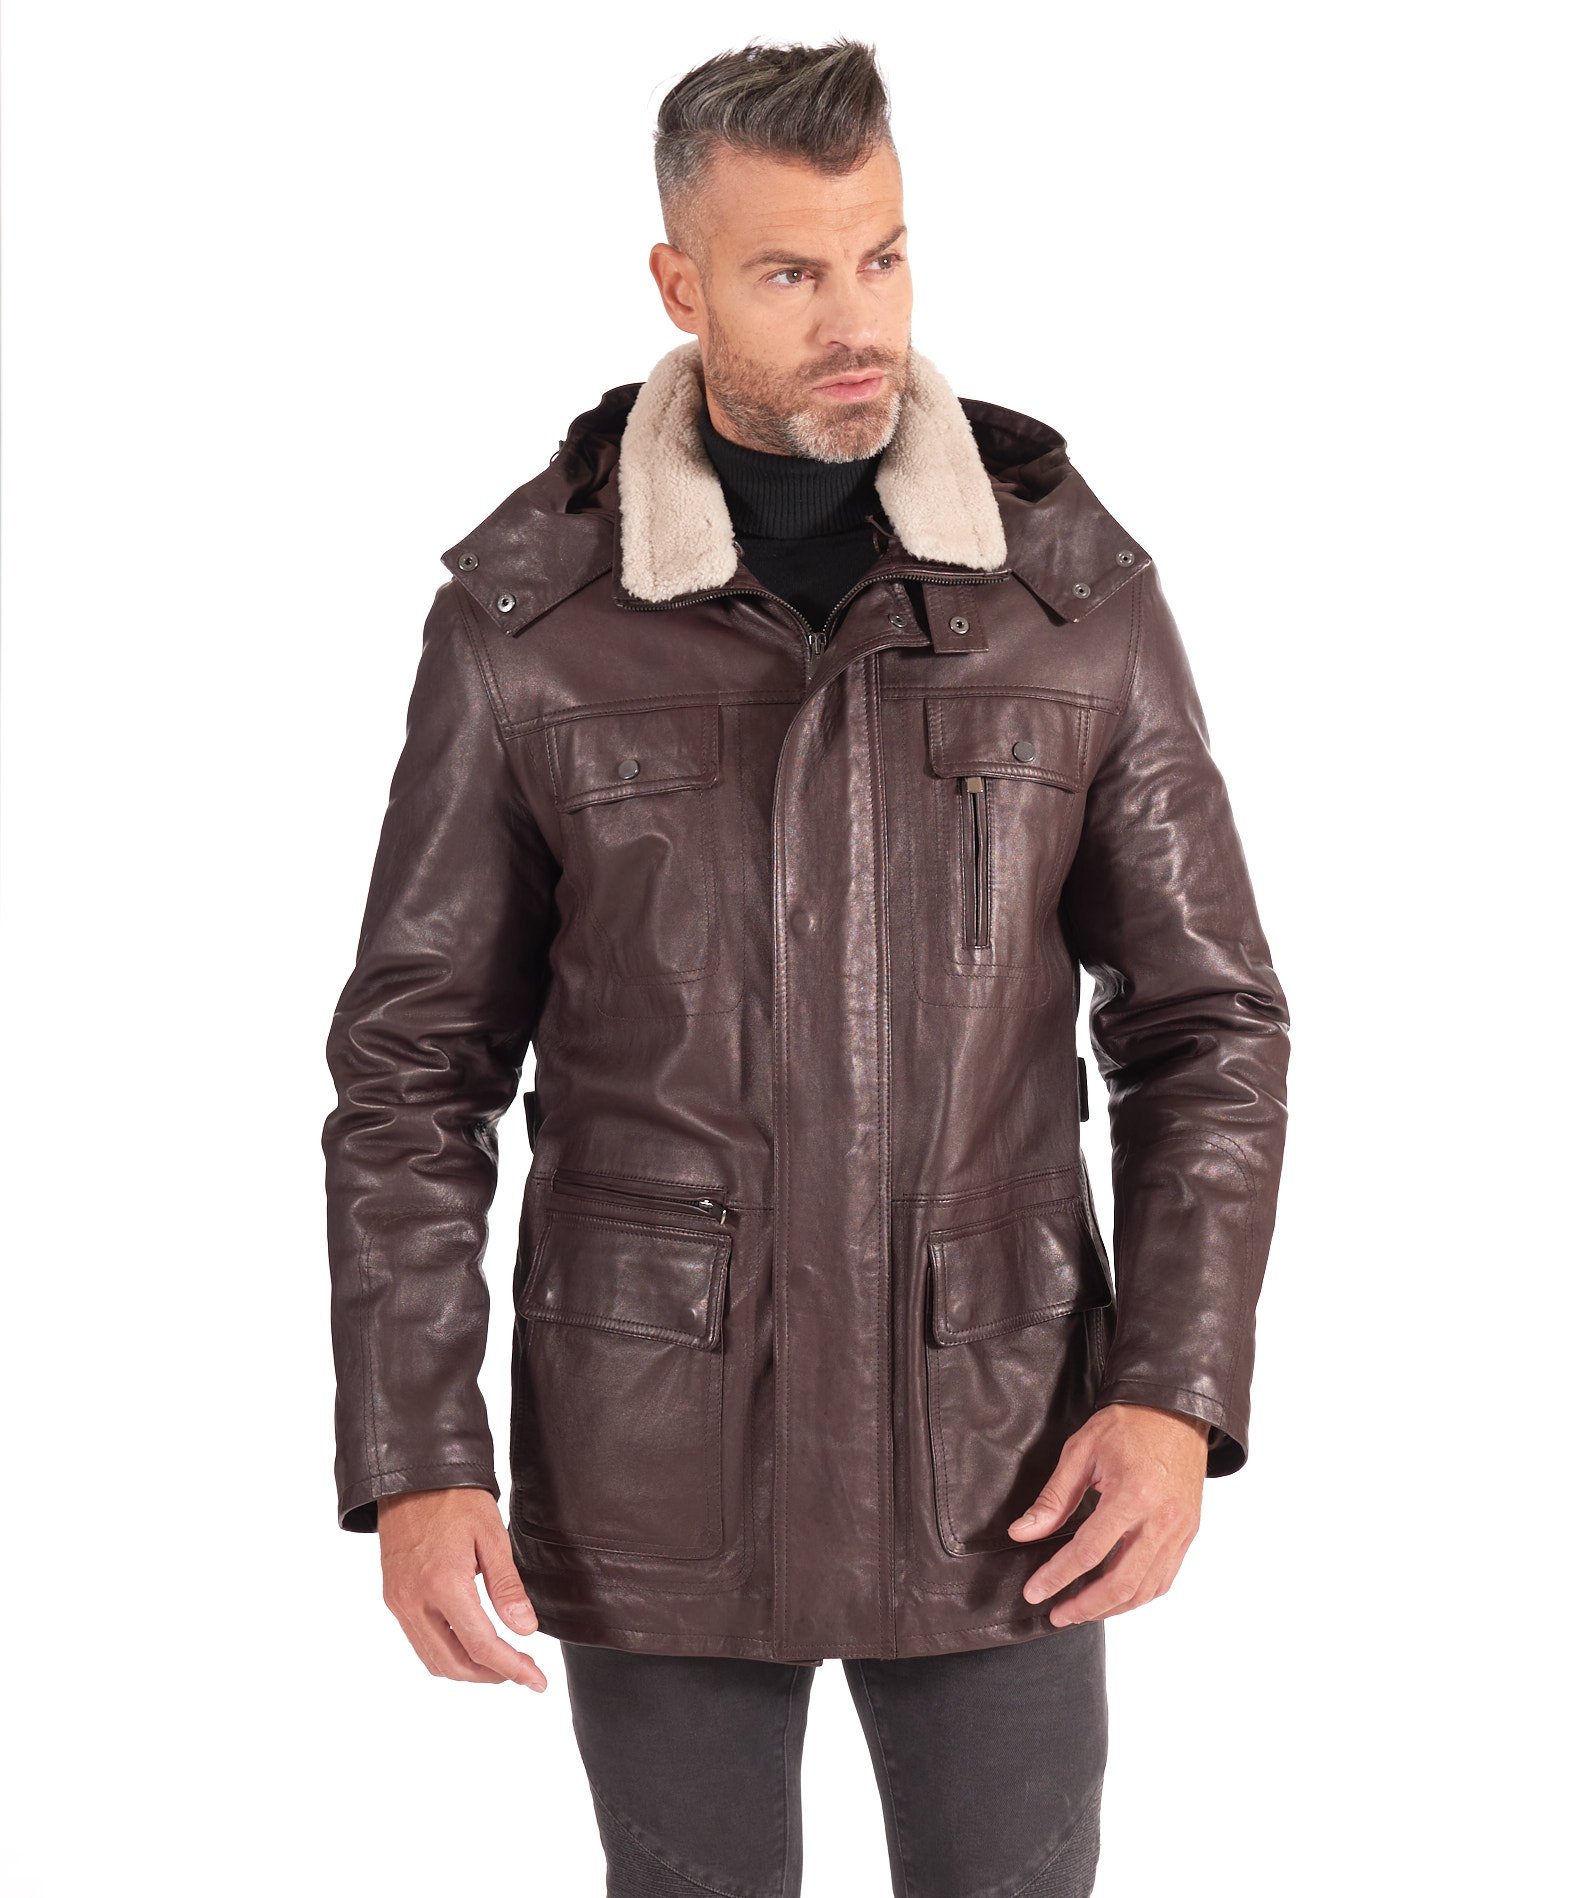 Stud Button Leather Accent Jacket - Men - OBSOLETES DO NOT TOUCH